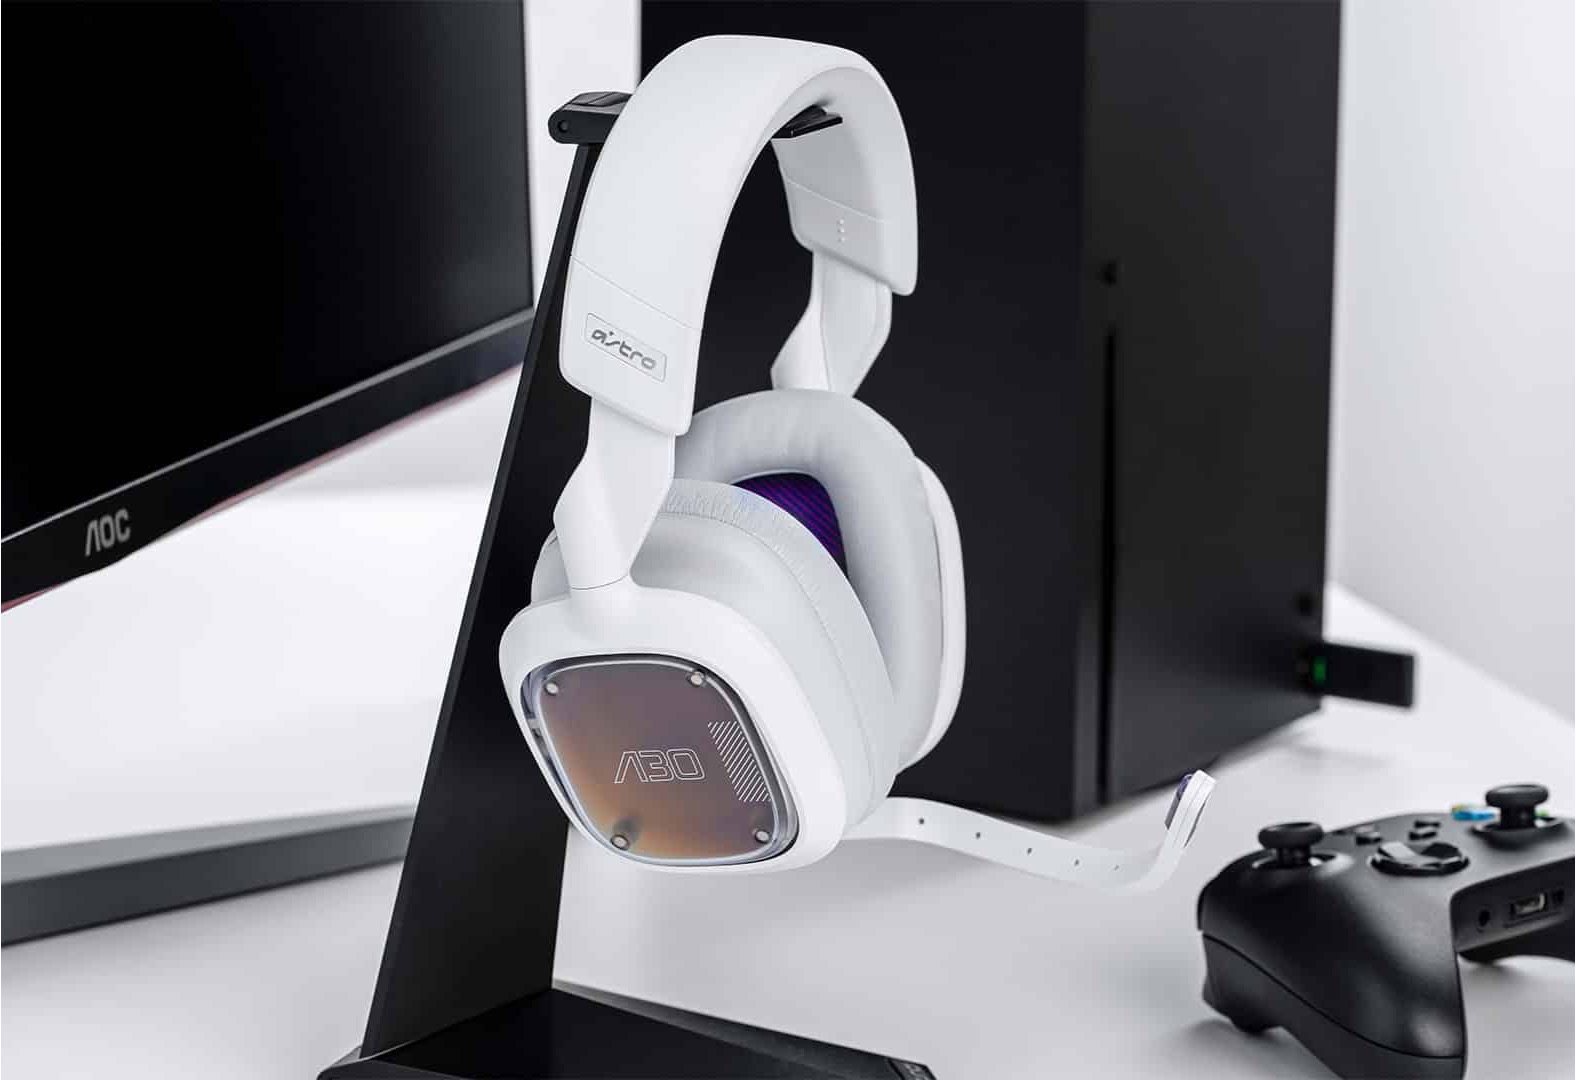 The Best Gaming Headsets in 2023